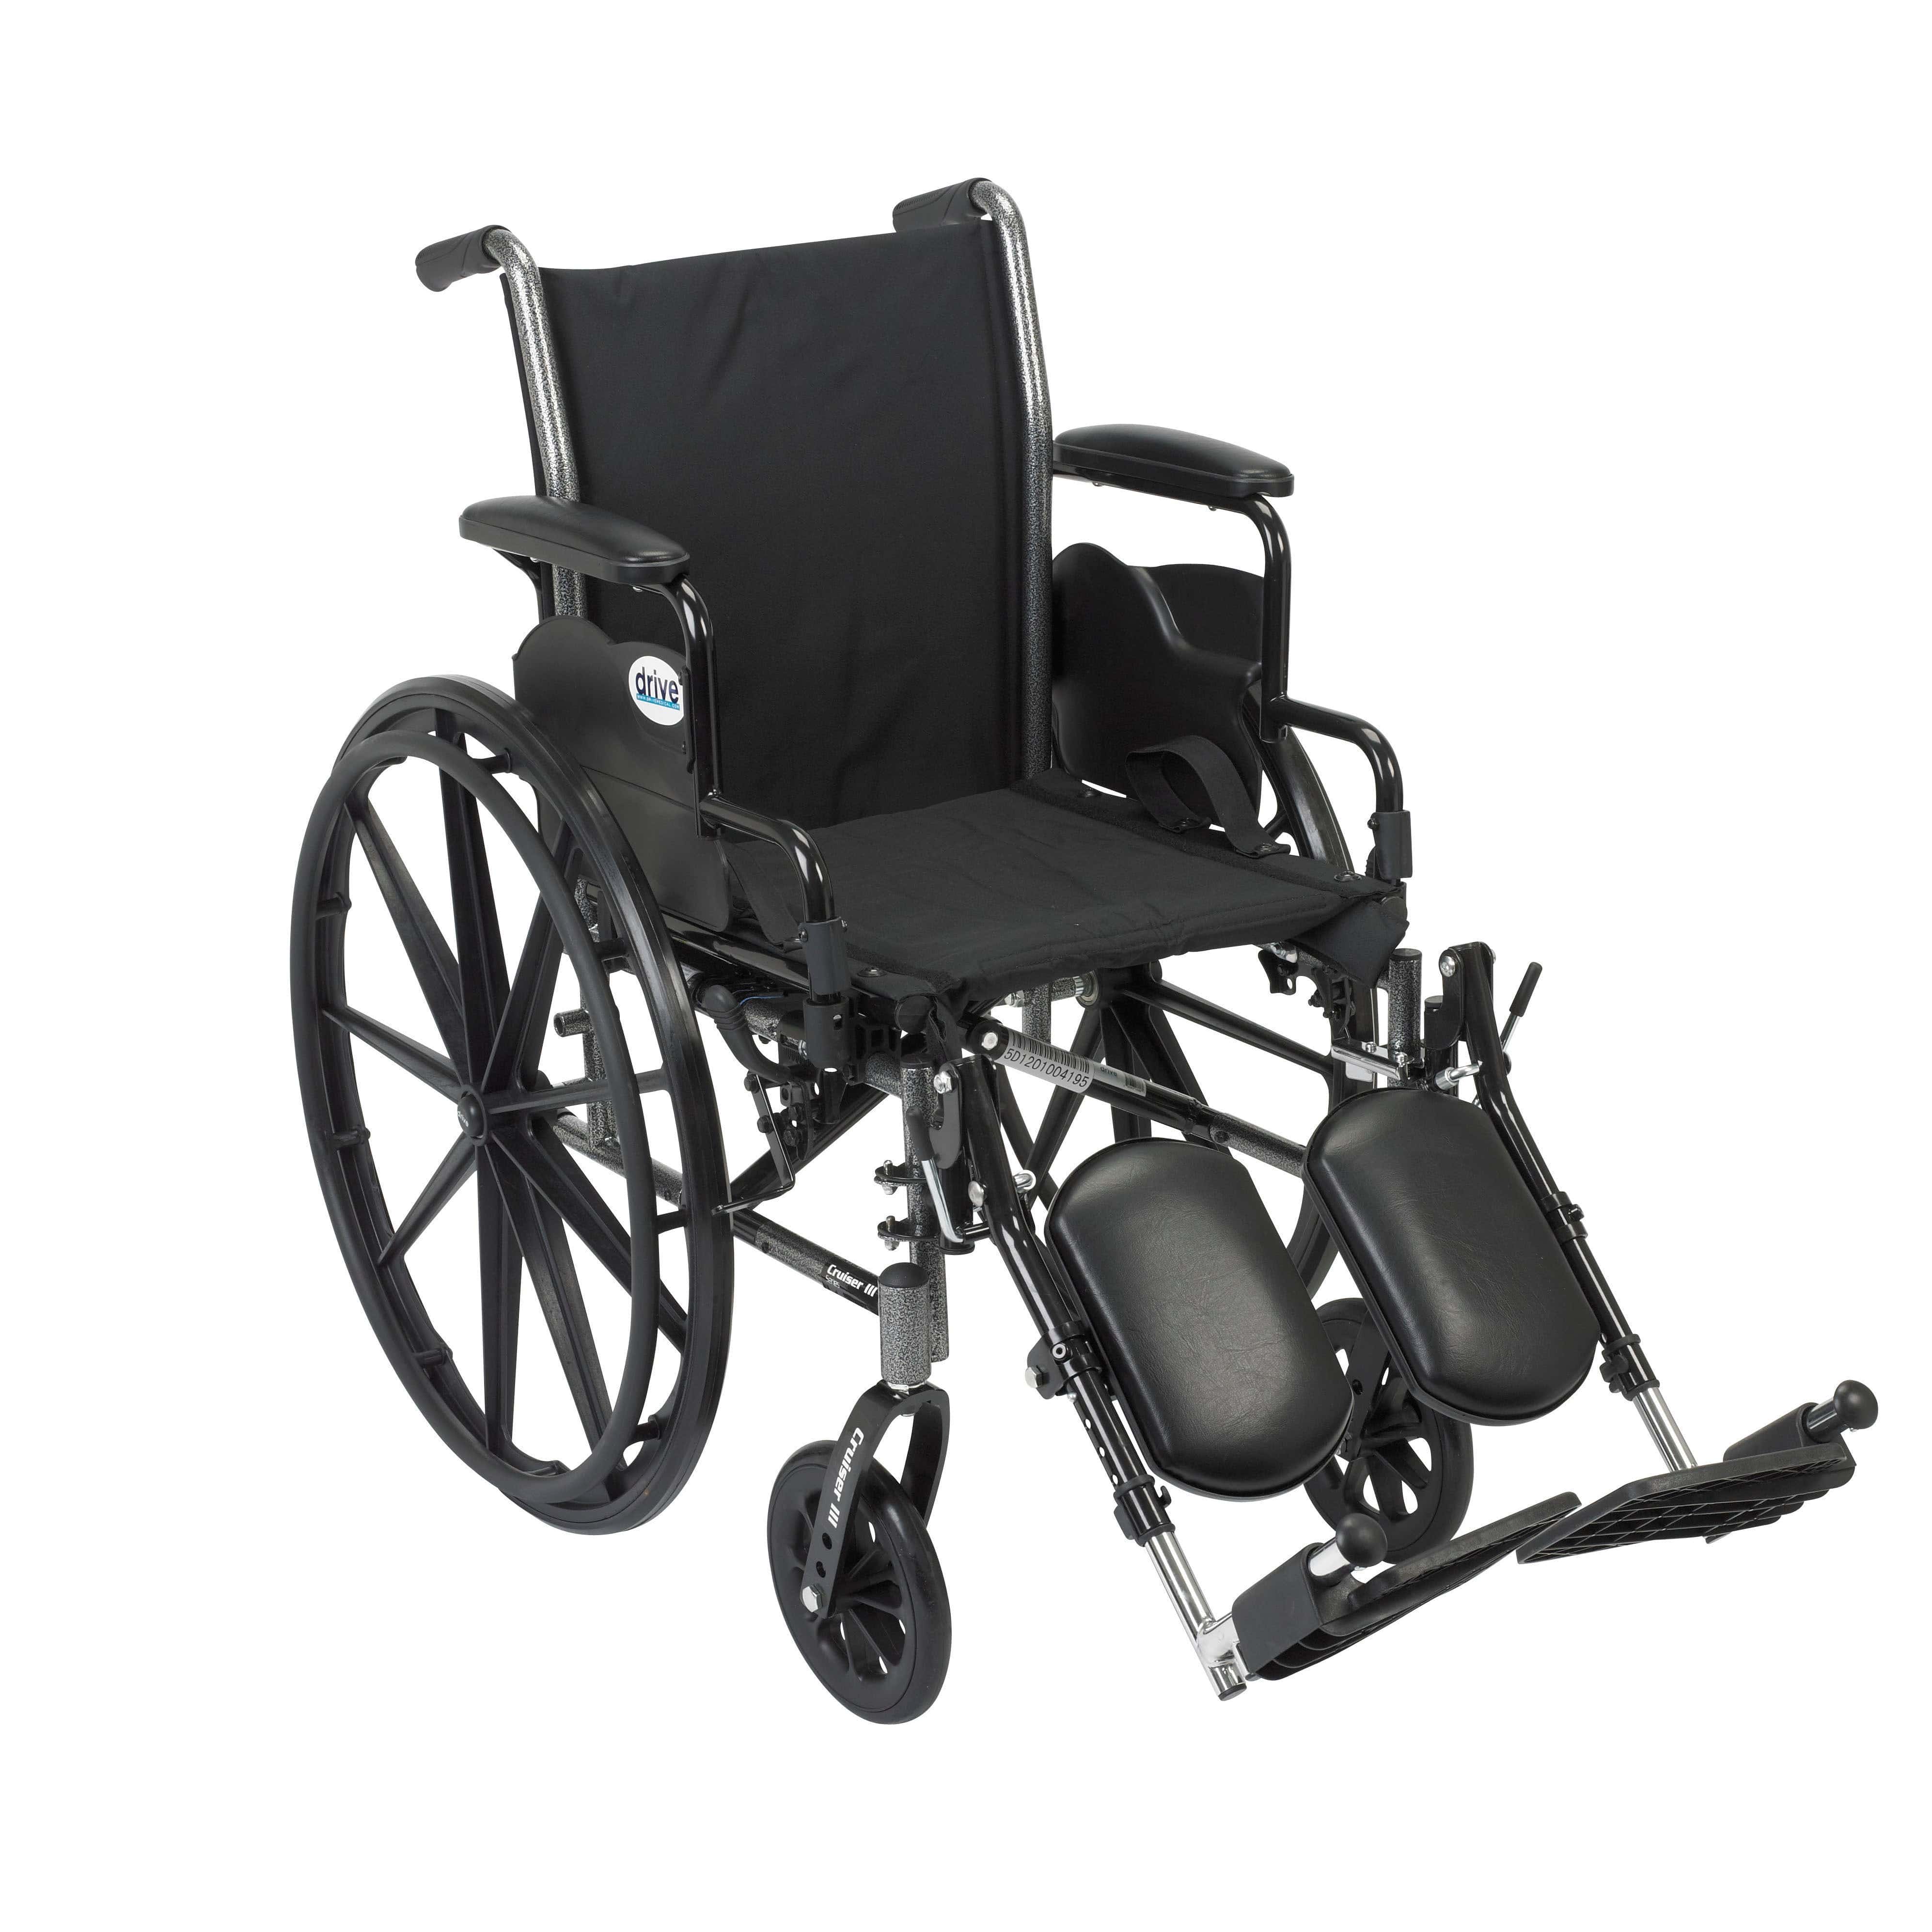 Drive Medical Wheelchairs Flip Back Removable Desk Arms and Elevating Leg Rests / 18" Seat Drive Medical Cruiser III Light Weight Wheelchair with Flip Back Removable Arms